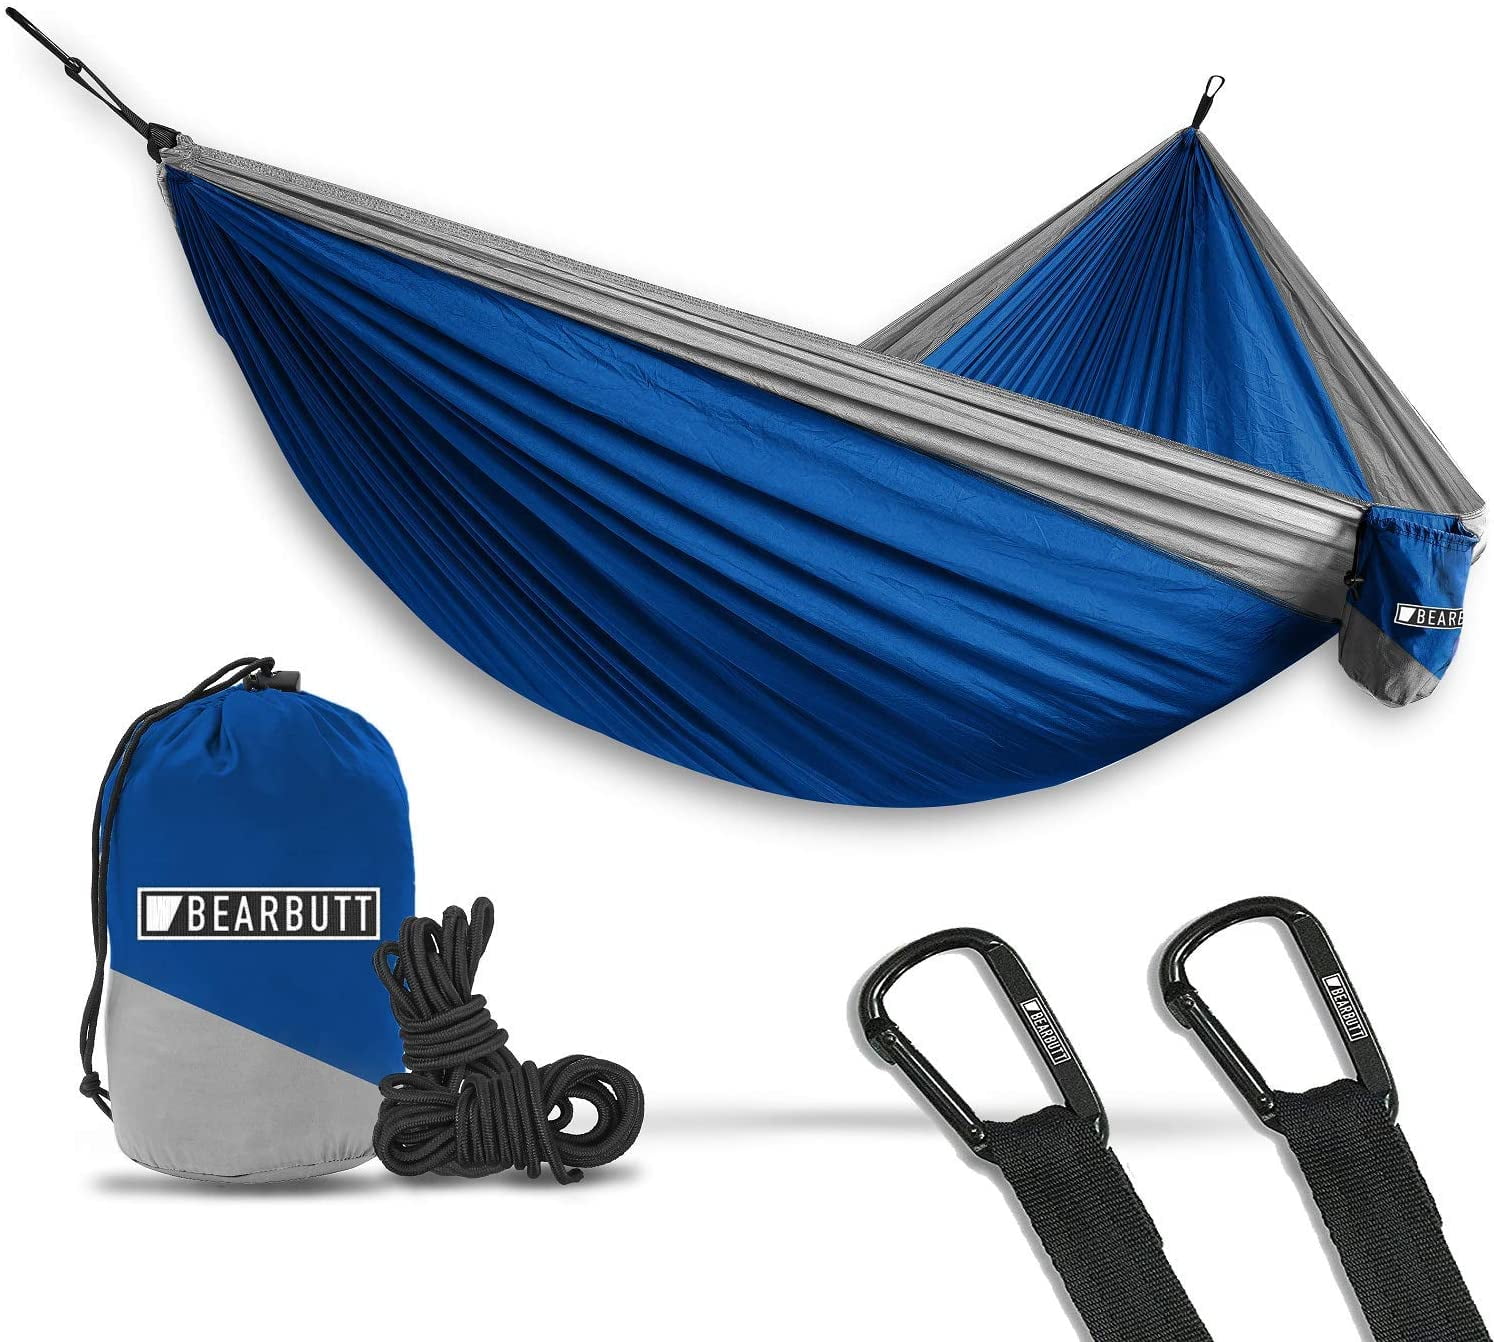 Lifeleads Camping Hammock-Nylon Double and Single Portable Parachute Lightweight for Outdoor or Indoor Backpacking Travel Hiking